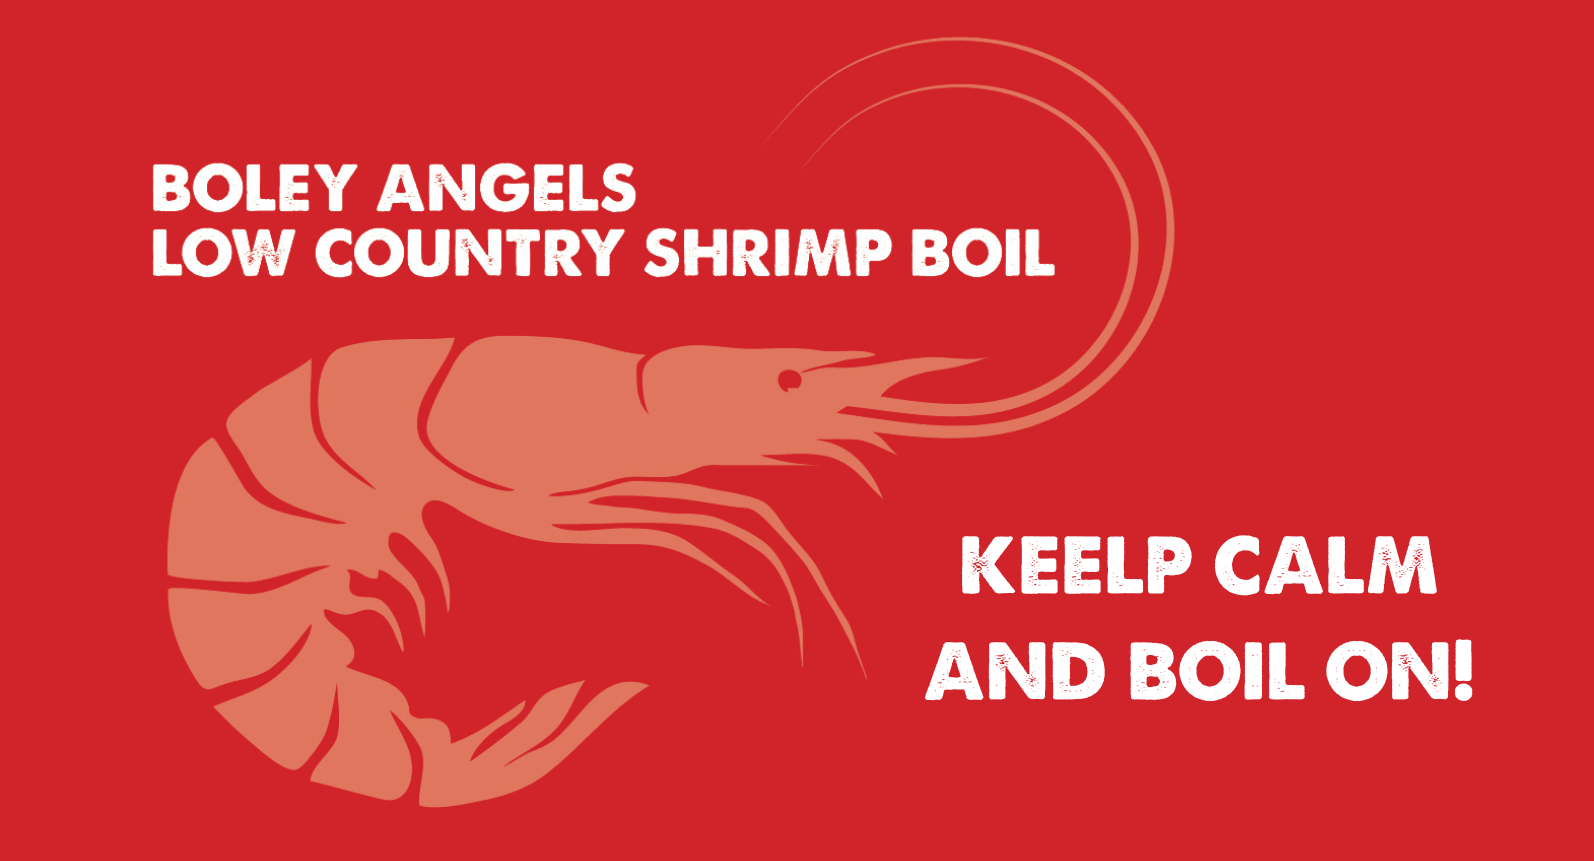 Low Country Shrimp Boil High on Great Food & Entertainment!